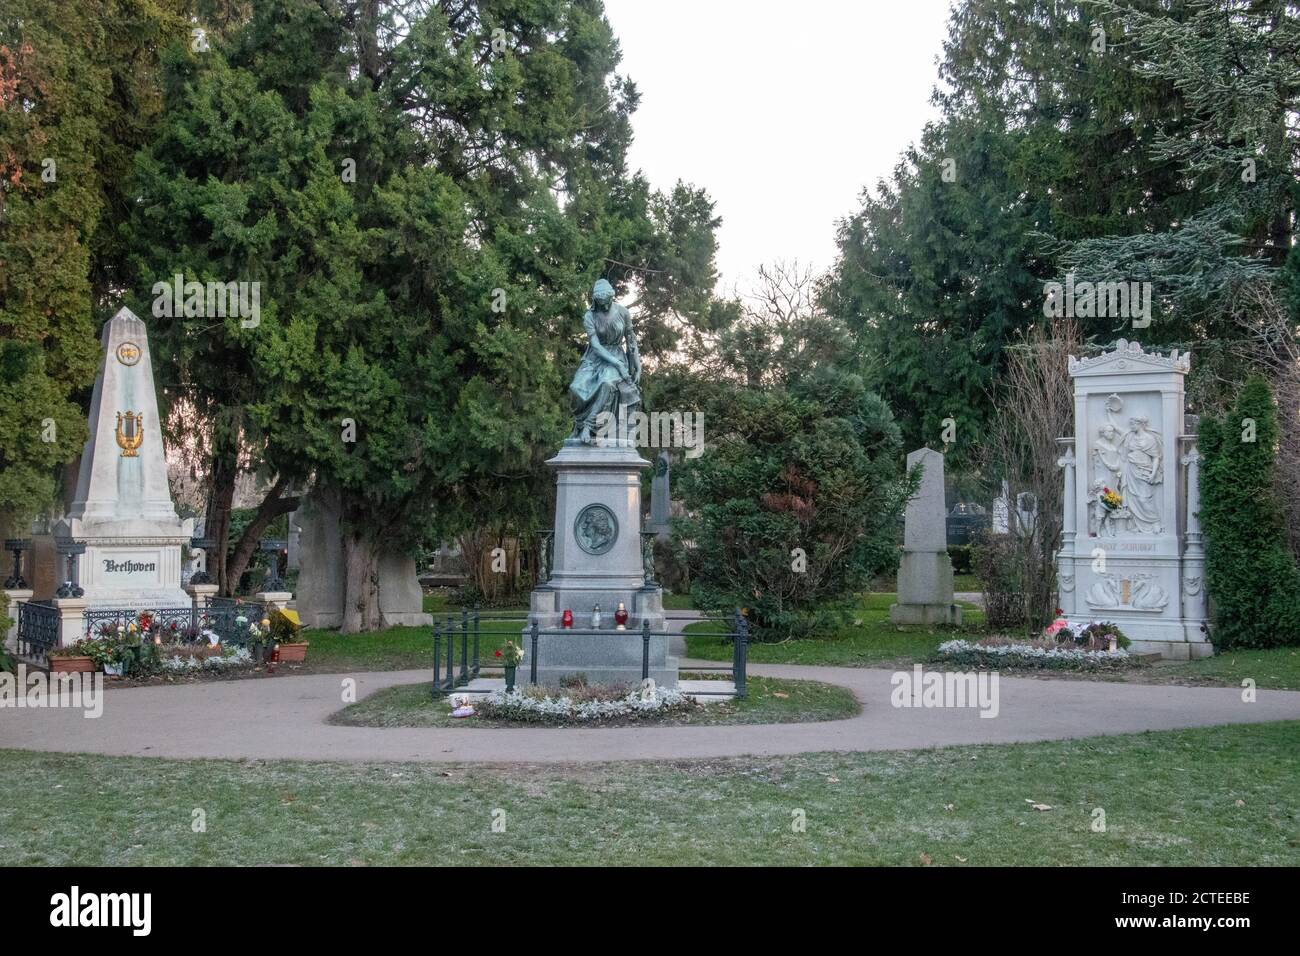 Tombs and monuments of Beethoven, Mozart and Schubert. Vienna Central Cemetary, Vienna, Austria. Stock Photo